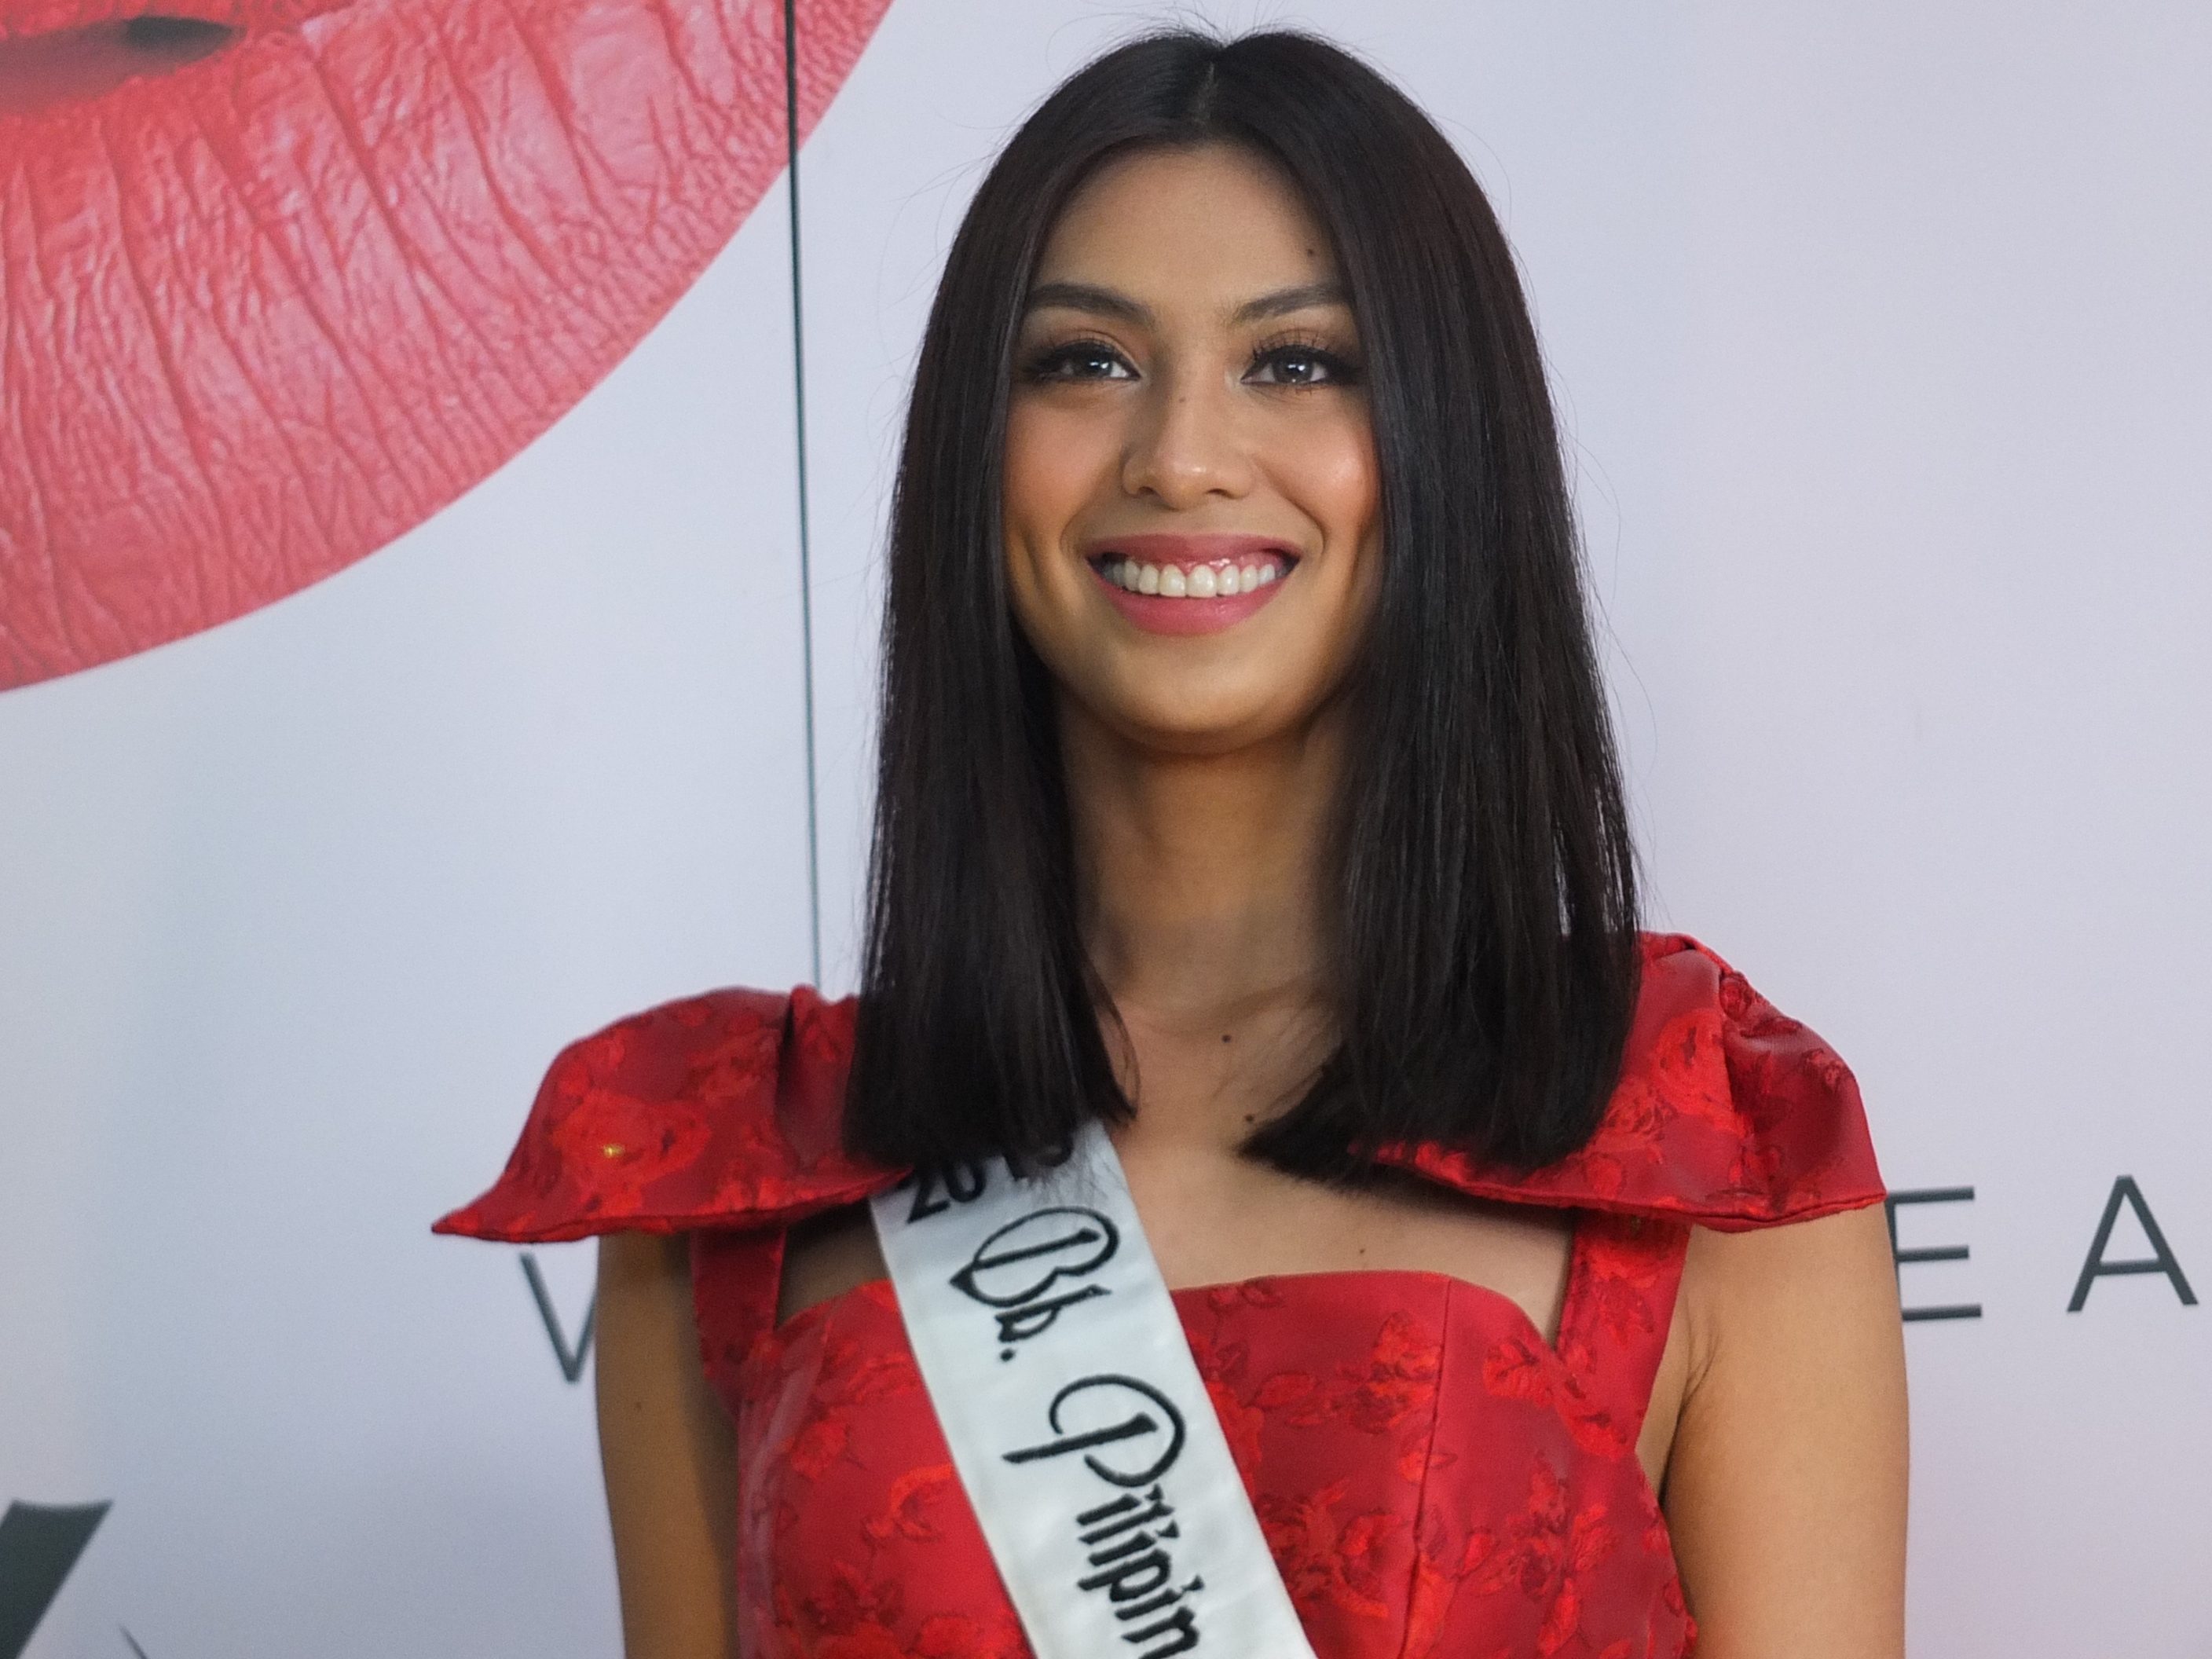 NEUTRAL. Bb Pilipinas International 2019 Patch Magtanong says they try to be neutral in answering political questions thrown at them.  